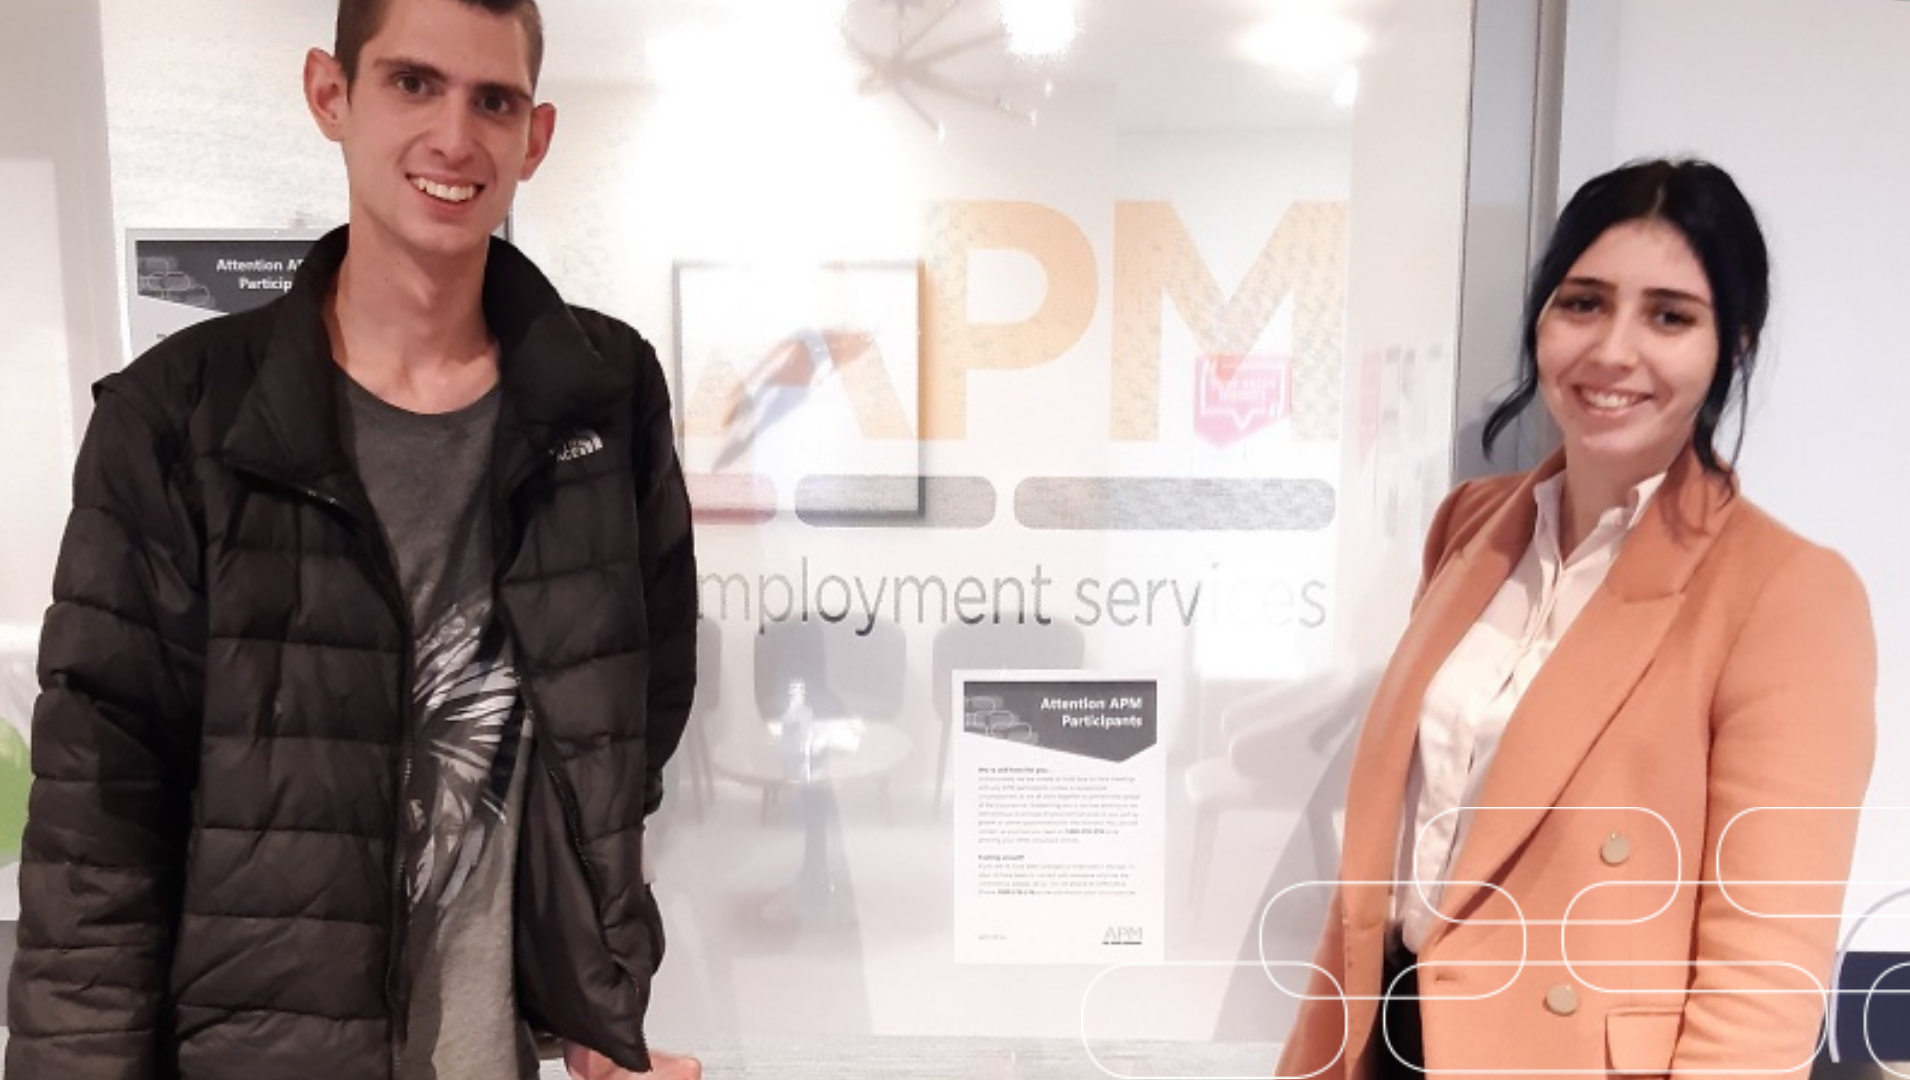 Aaron standing with his APM Employment Consultant April in front of a door with the APM logo on it